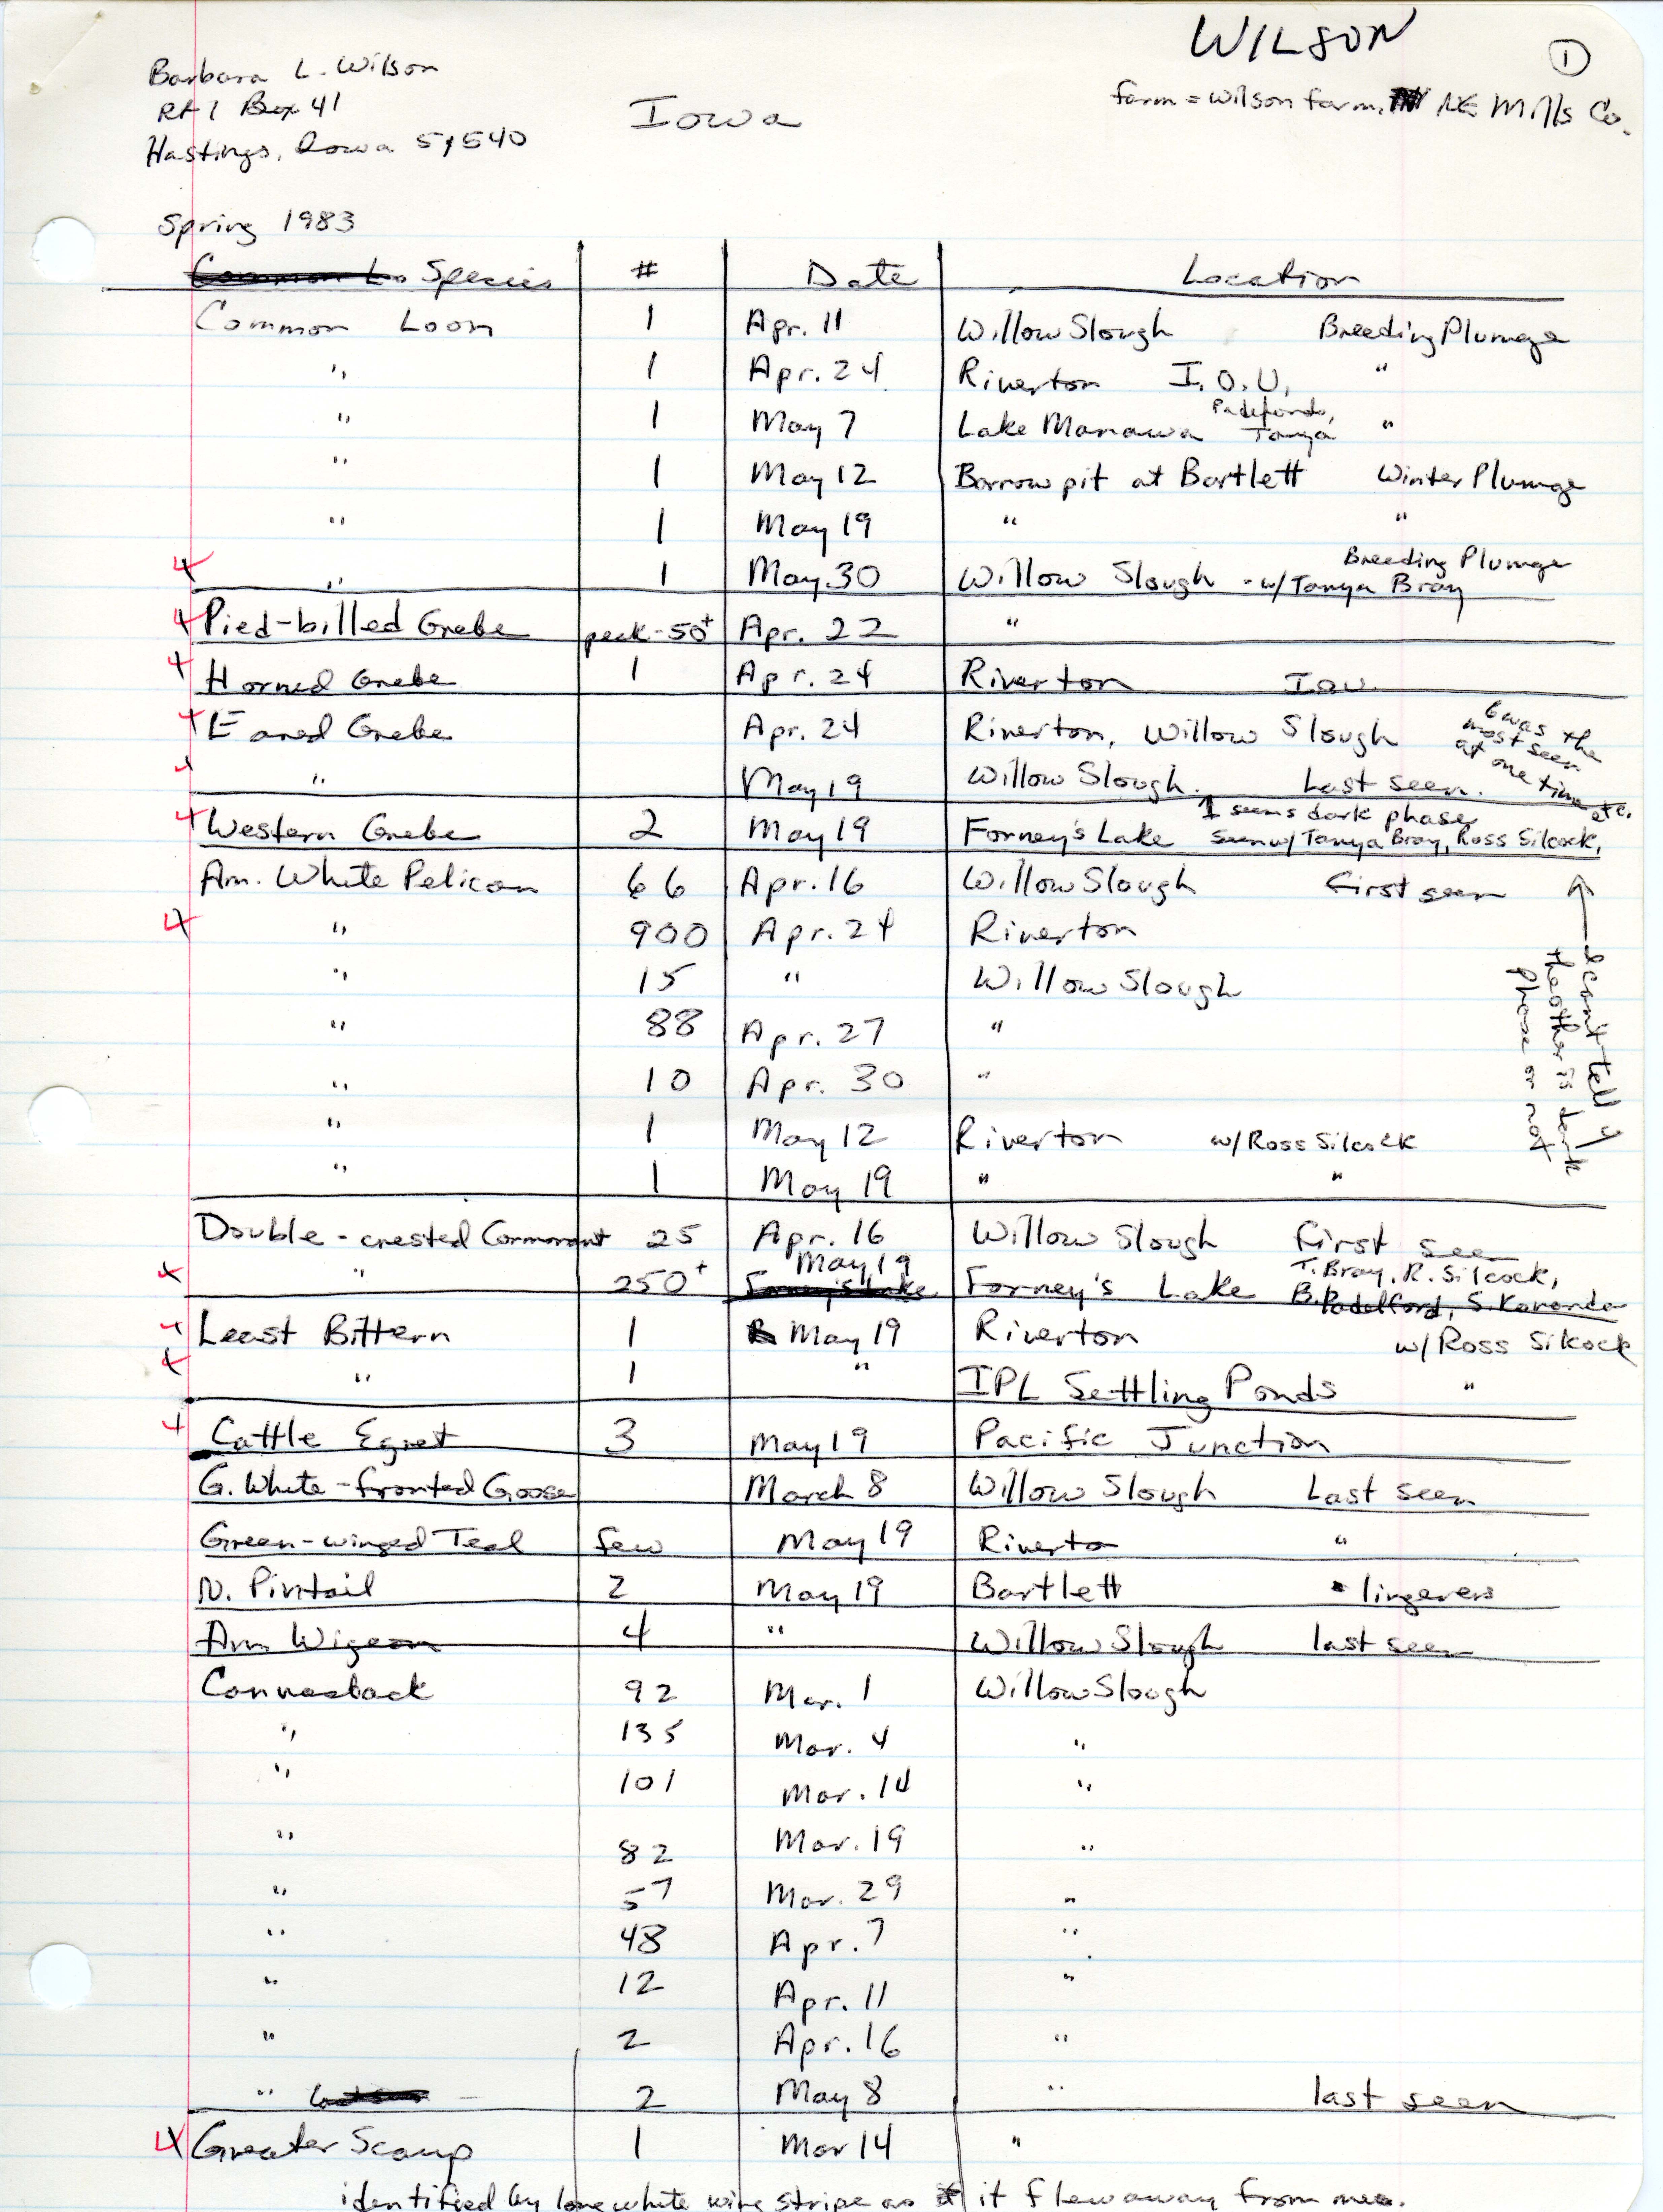 Field notes and letter from Barbara L. Wilson to Thomas H. Kent regarding spring bird sightings, June 1, 1983